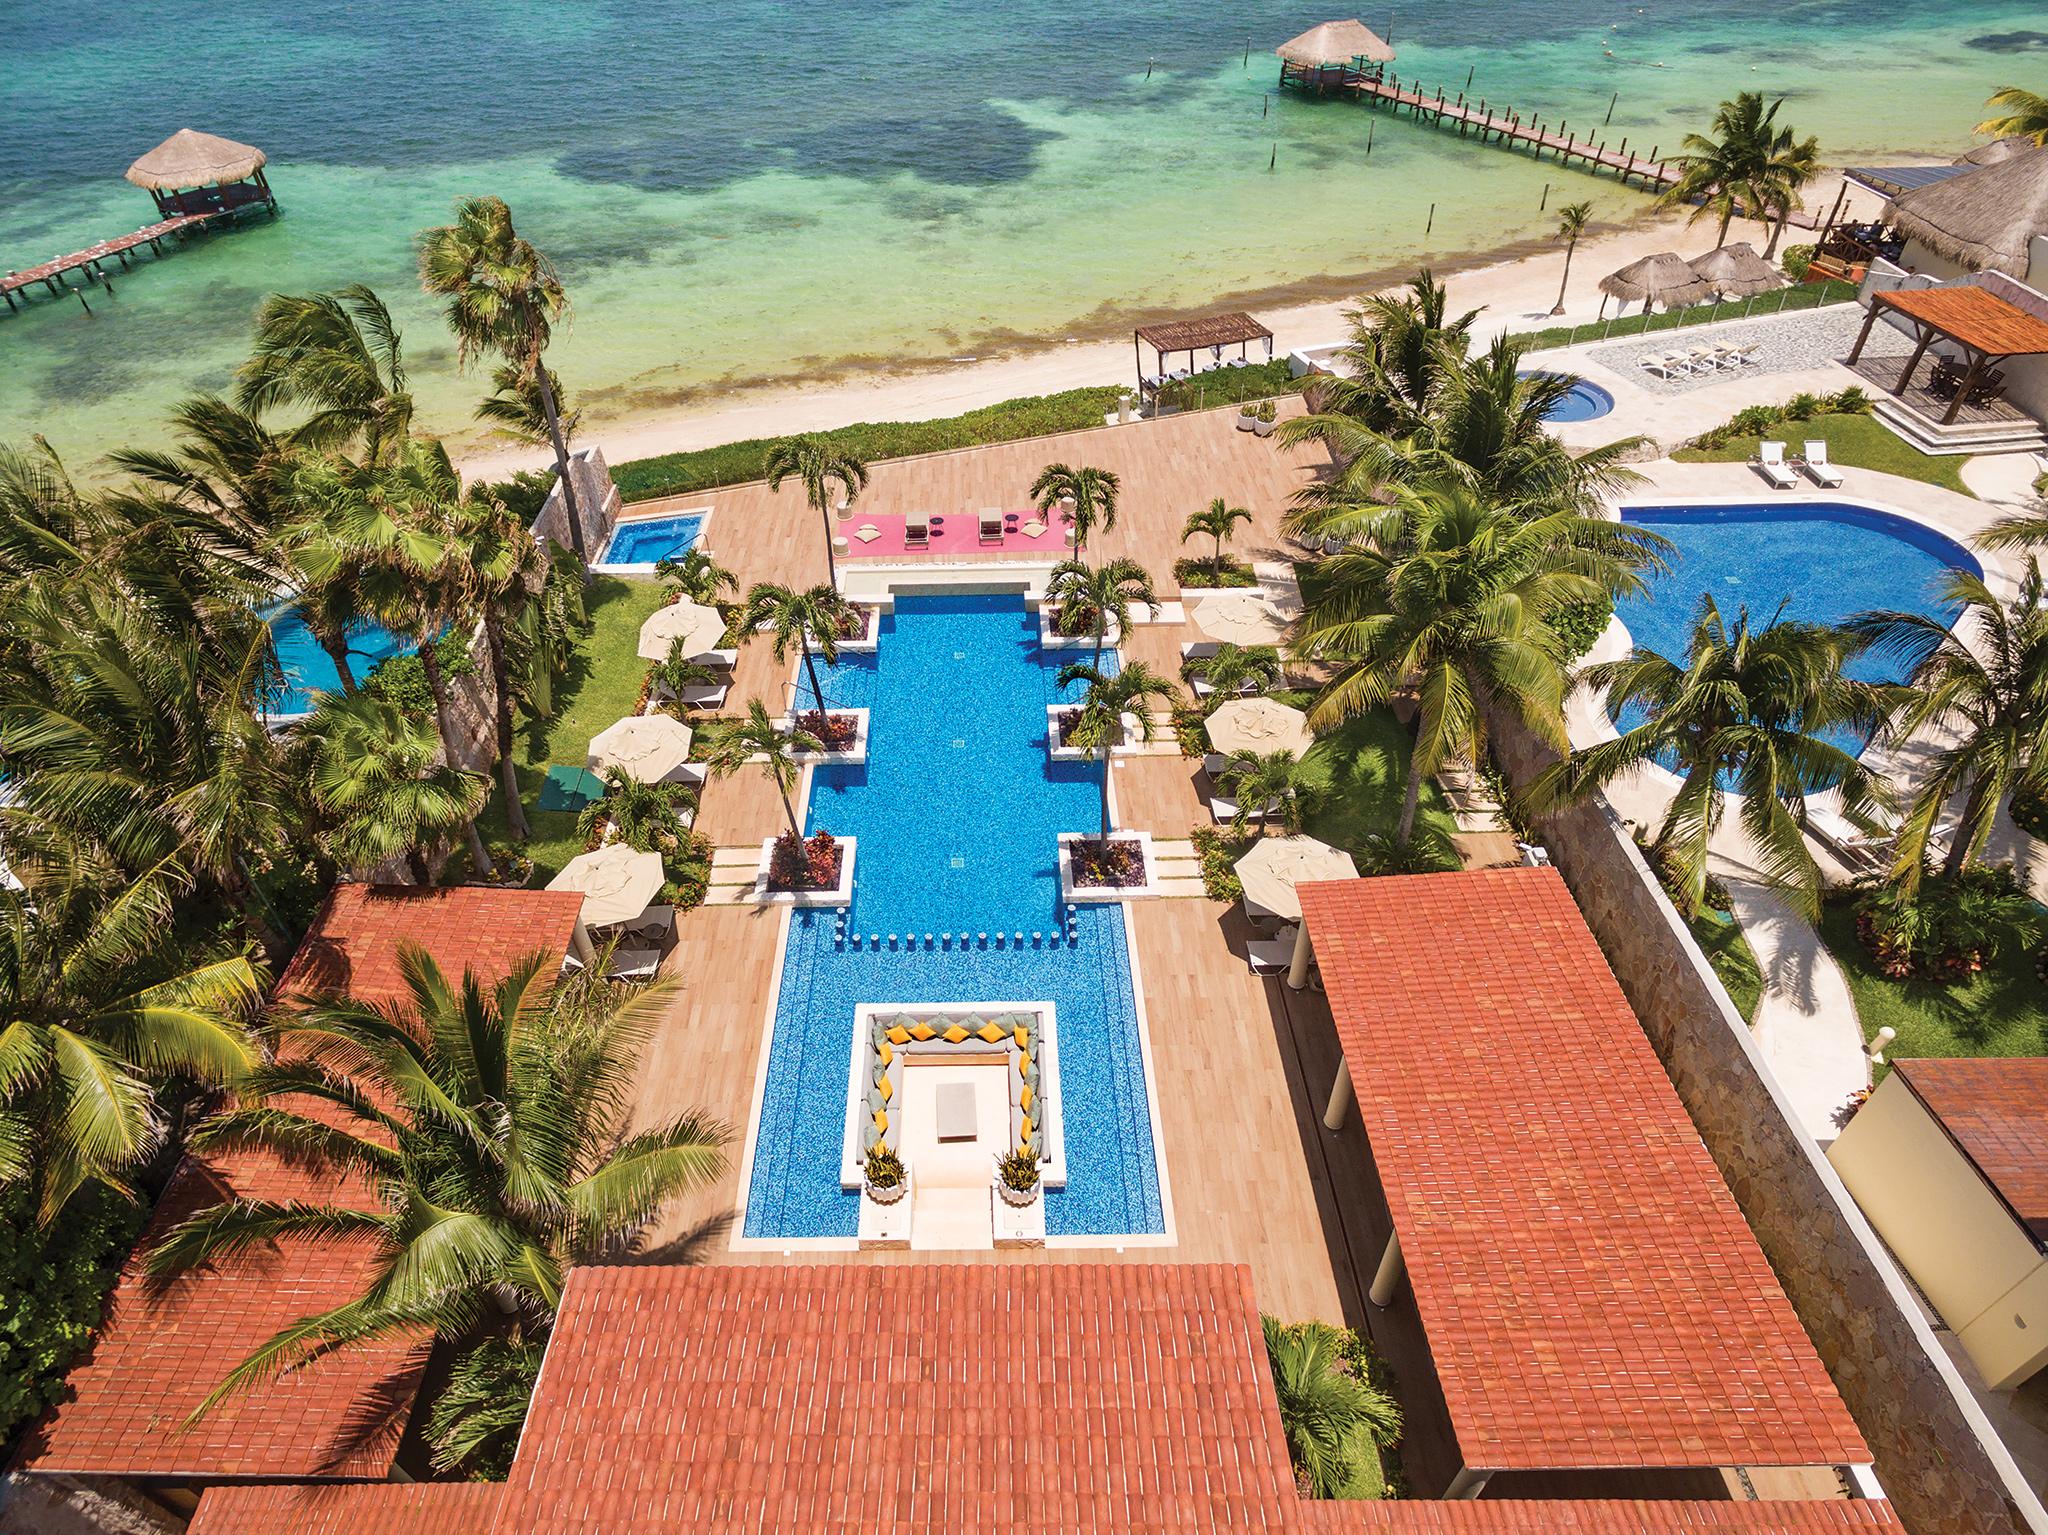 Aerial view of a resort